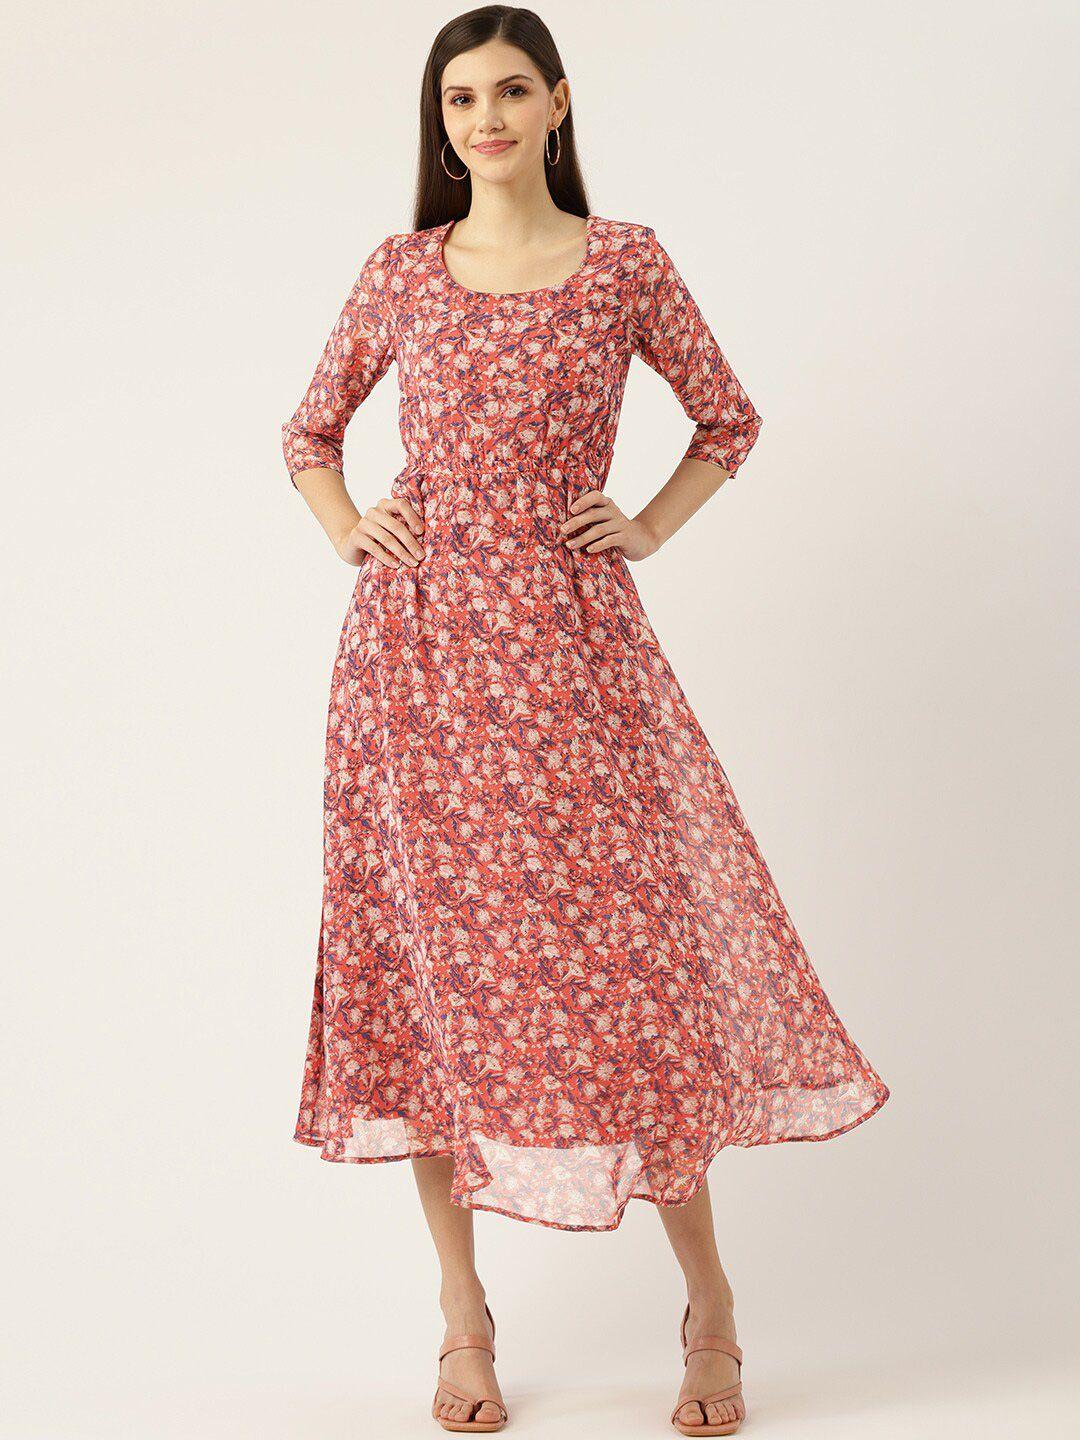 dressberry red & beige floral printed round neck fit & flare midi dress